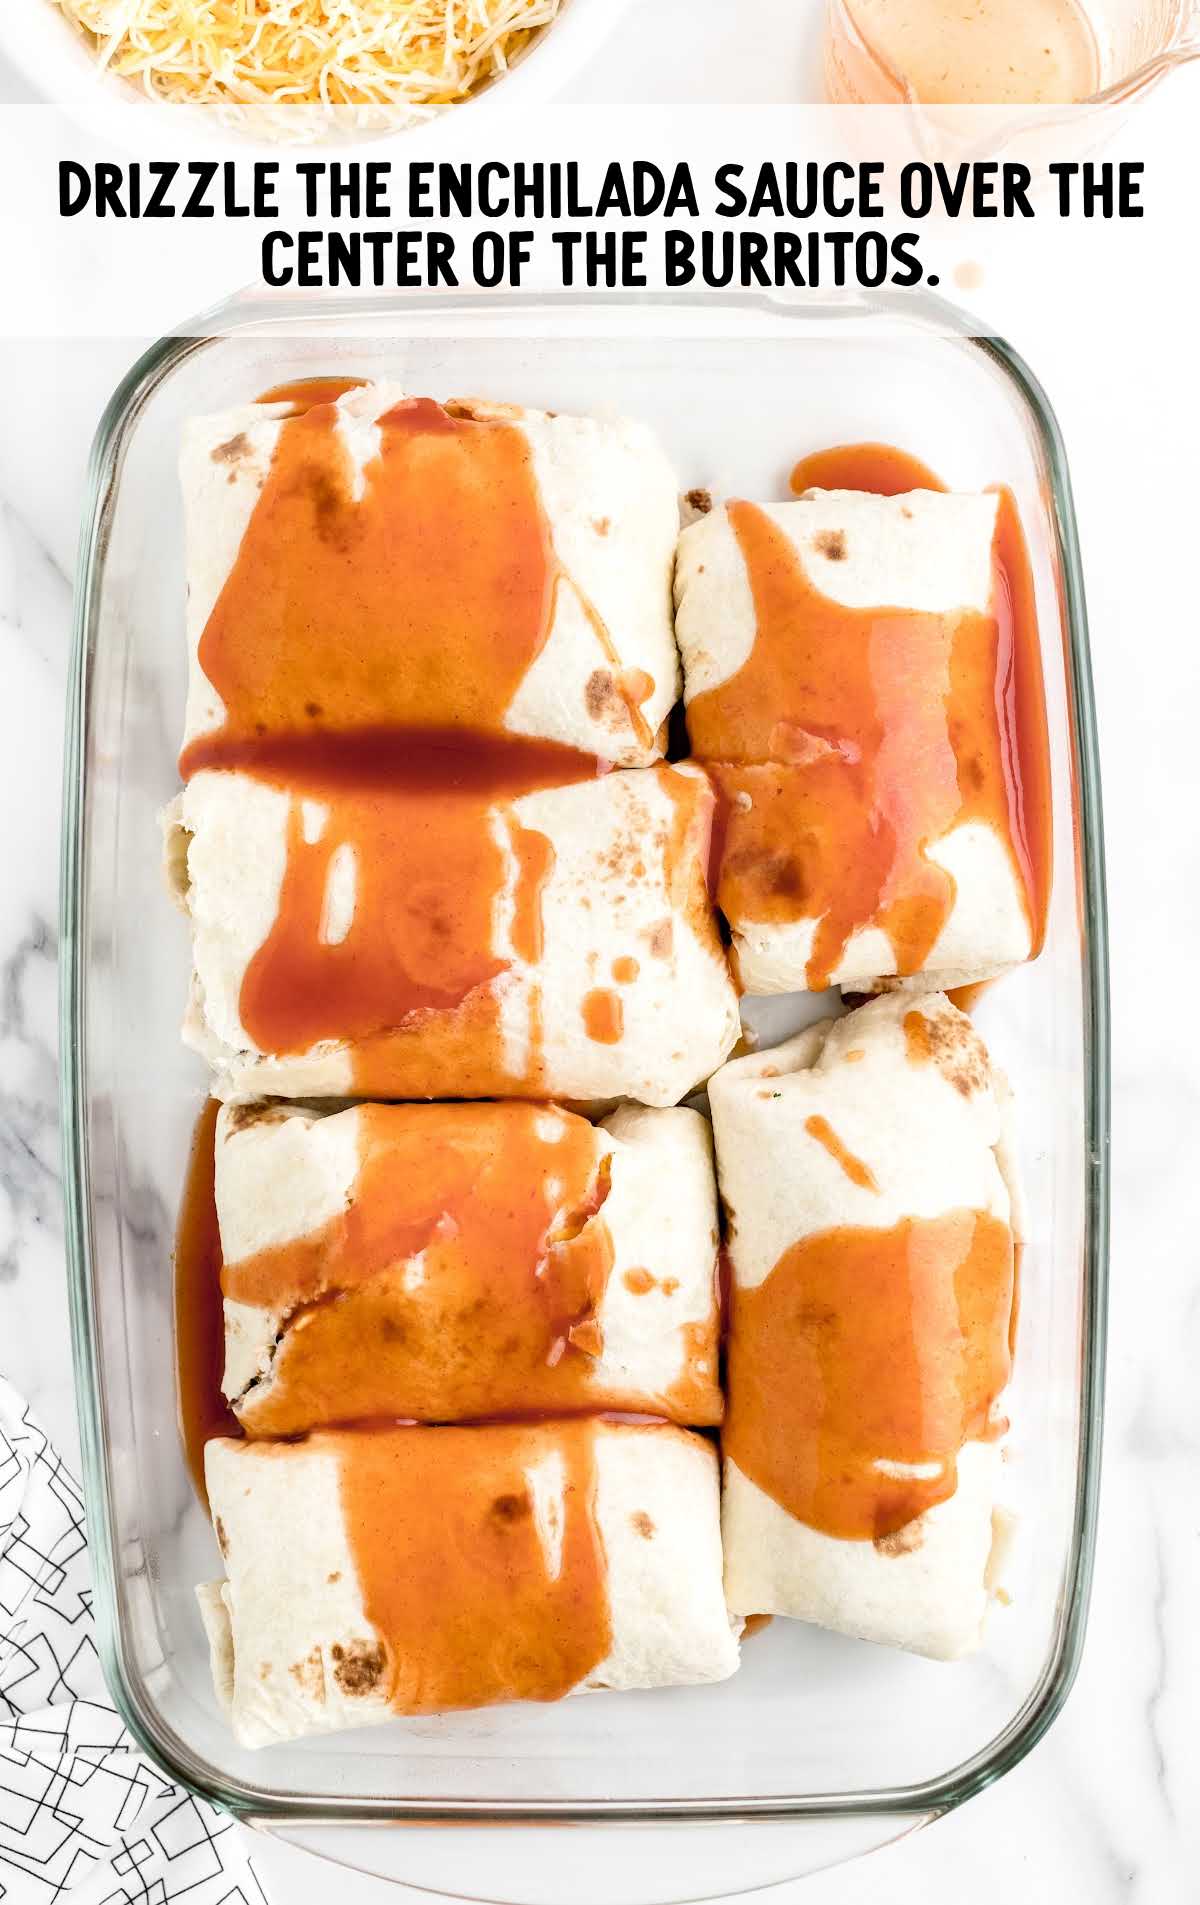 enchilada sauce drizzled on top of burritos in a baking dish